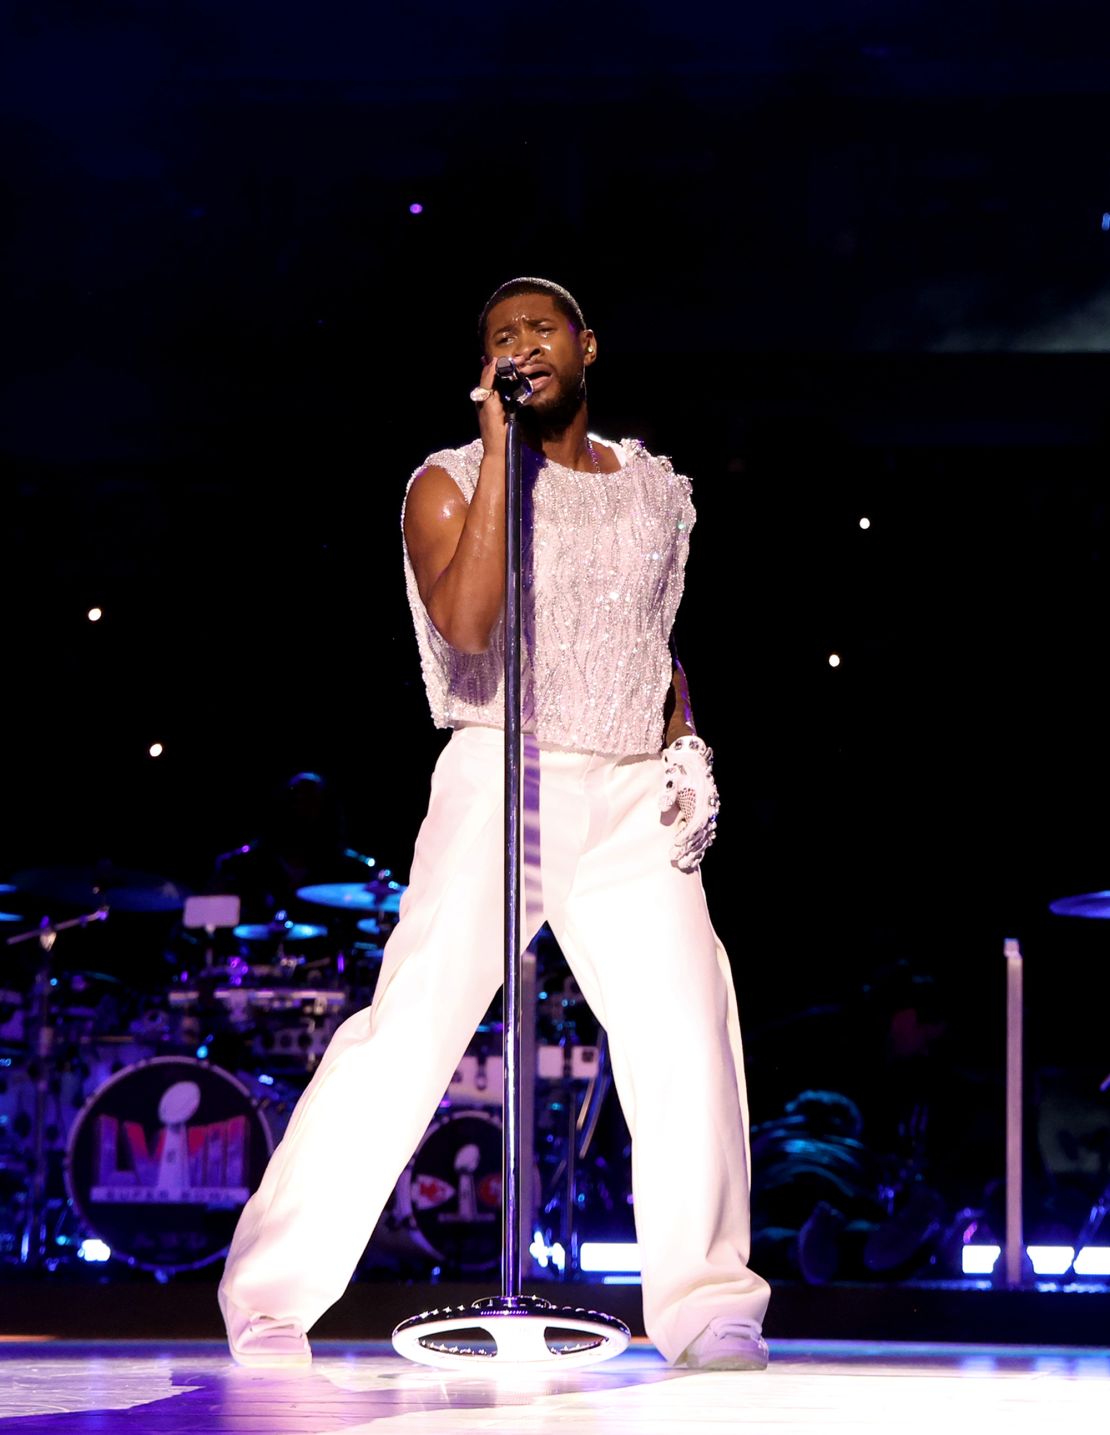 Usher performs in a crystal-encrusted D&G vest.